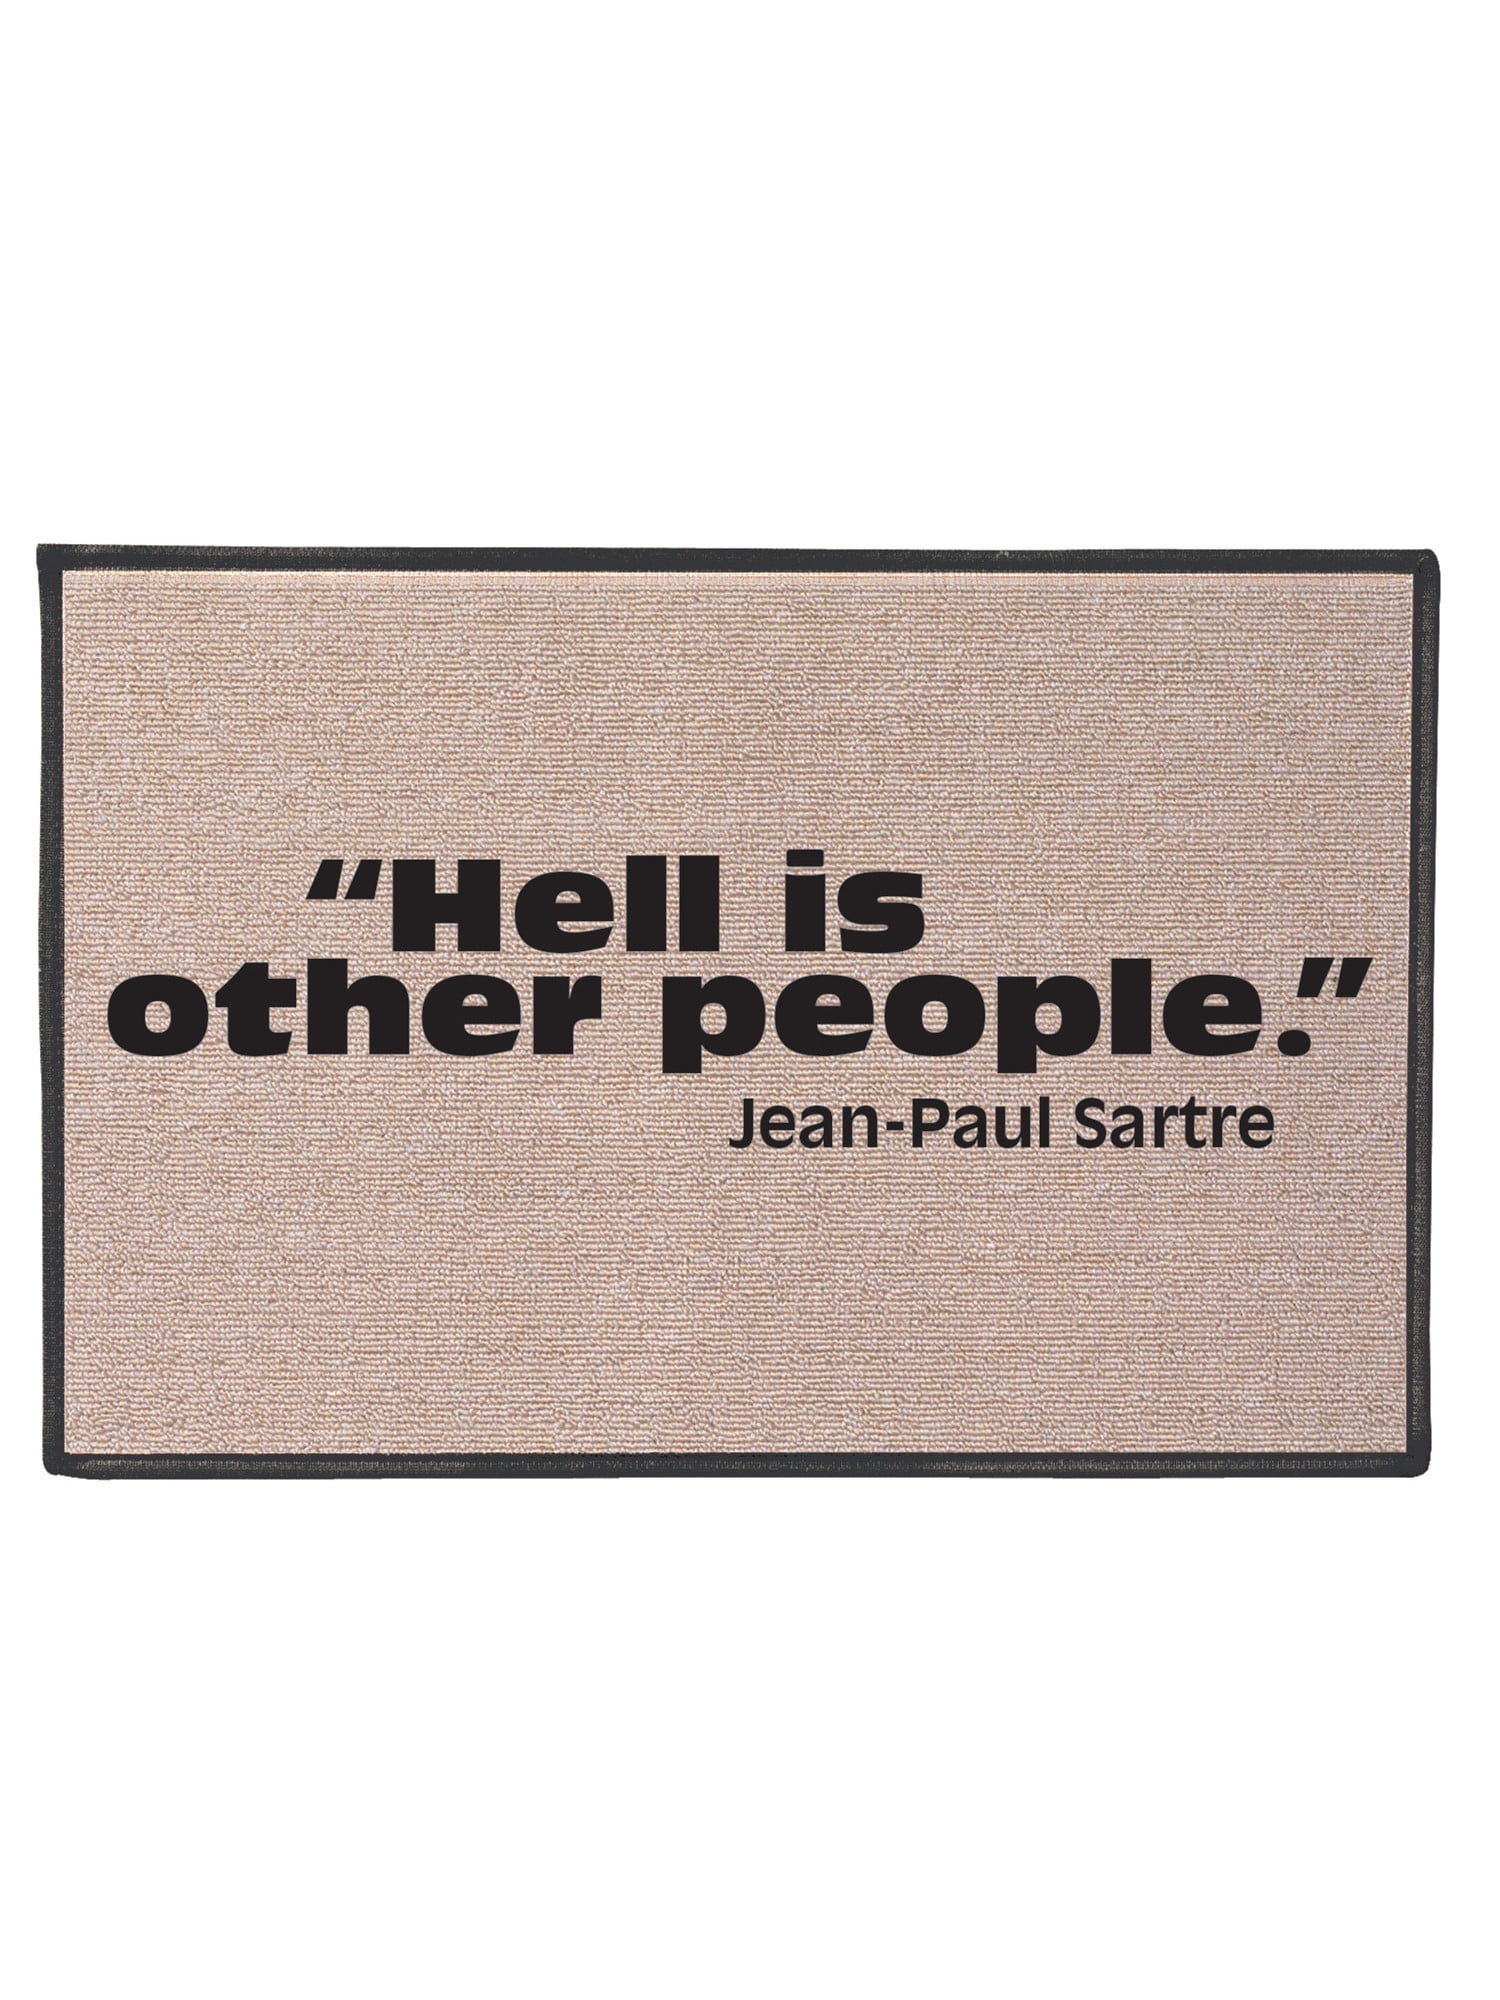 Welcome Mats Kinda Classy Kinda Hood Doormat Personalized Funny Quotes Door mat for Entrance Way Non-Woven Fabric Top with a Anti-Slip Rubber Back for Front Door Indoor Mats Prank Gift